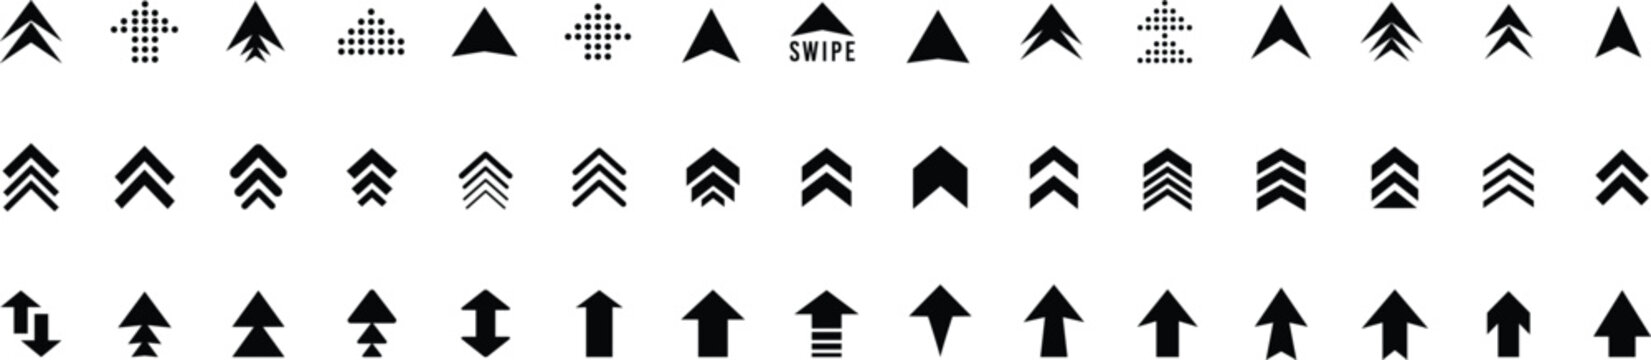 Swipe up arrow icon set. Swipe up, Buttons for social media with business infographic. Black arrows, buttons and web icons. Social media application. Scroll or swipe up